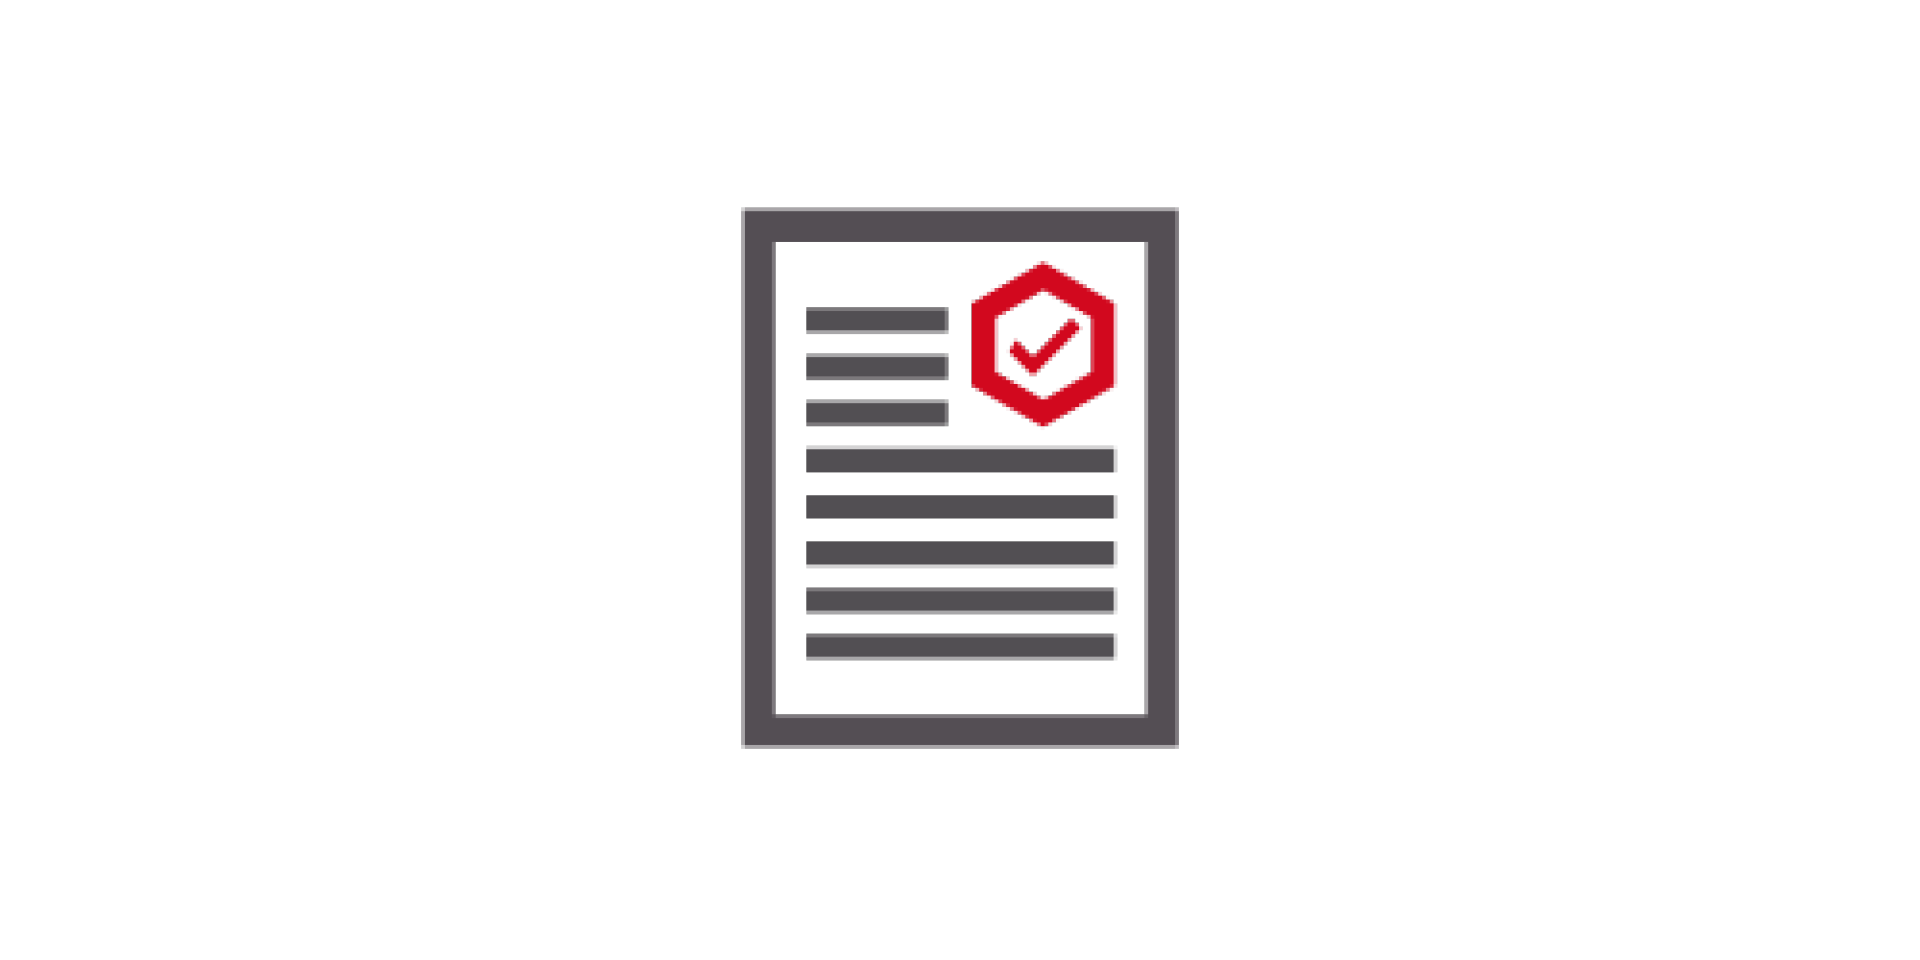 Illustration of one page document with red check mark